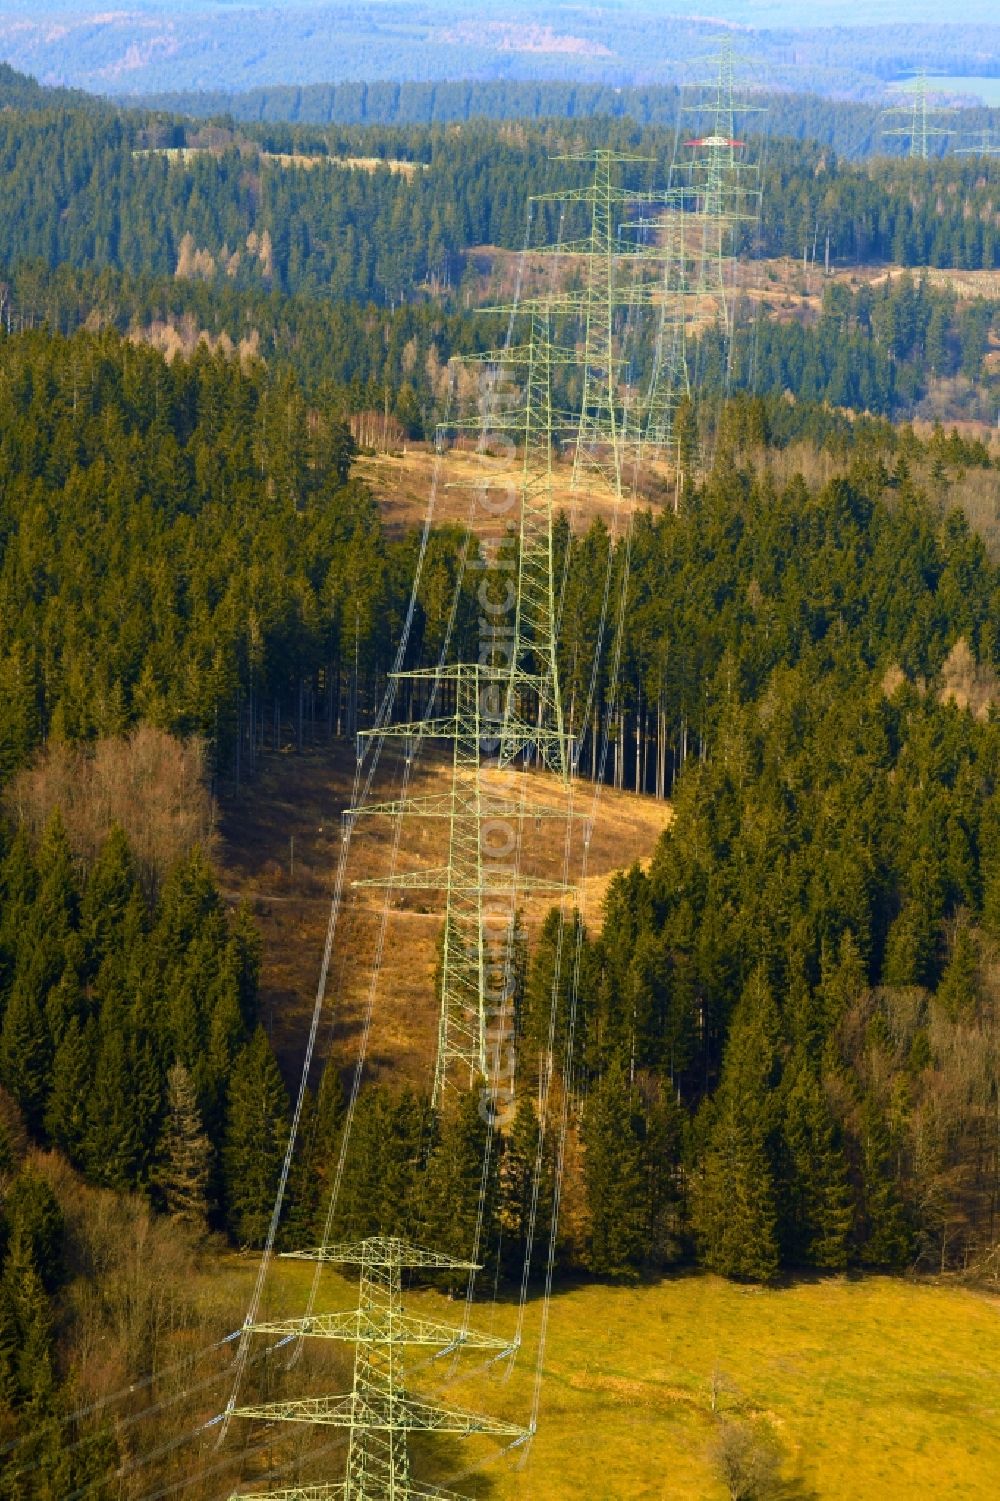 Möhrenbach from the bird's eye view: Aisles and route of the power supply and route of the supply lines and high-voltage pylons of the 380 kV three-phase extra-high voltage overhead line near Moehrenbach in the state of Thuringia, Germany